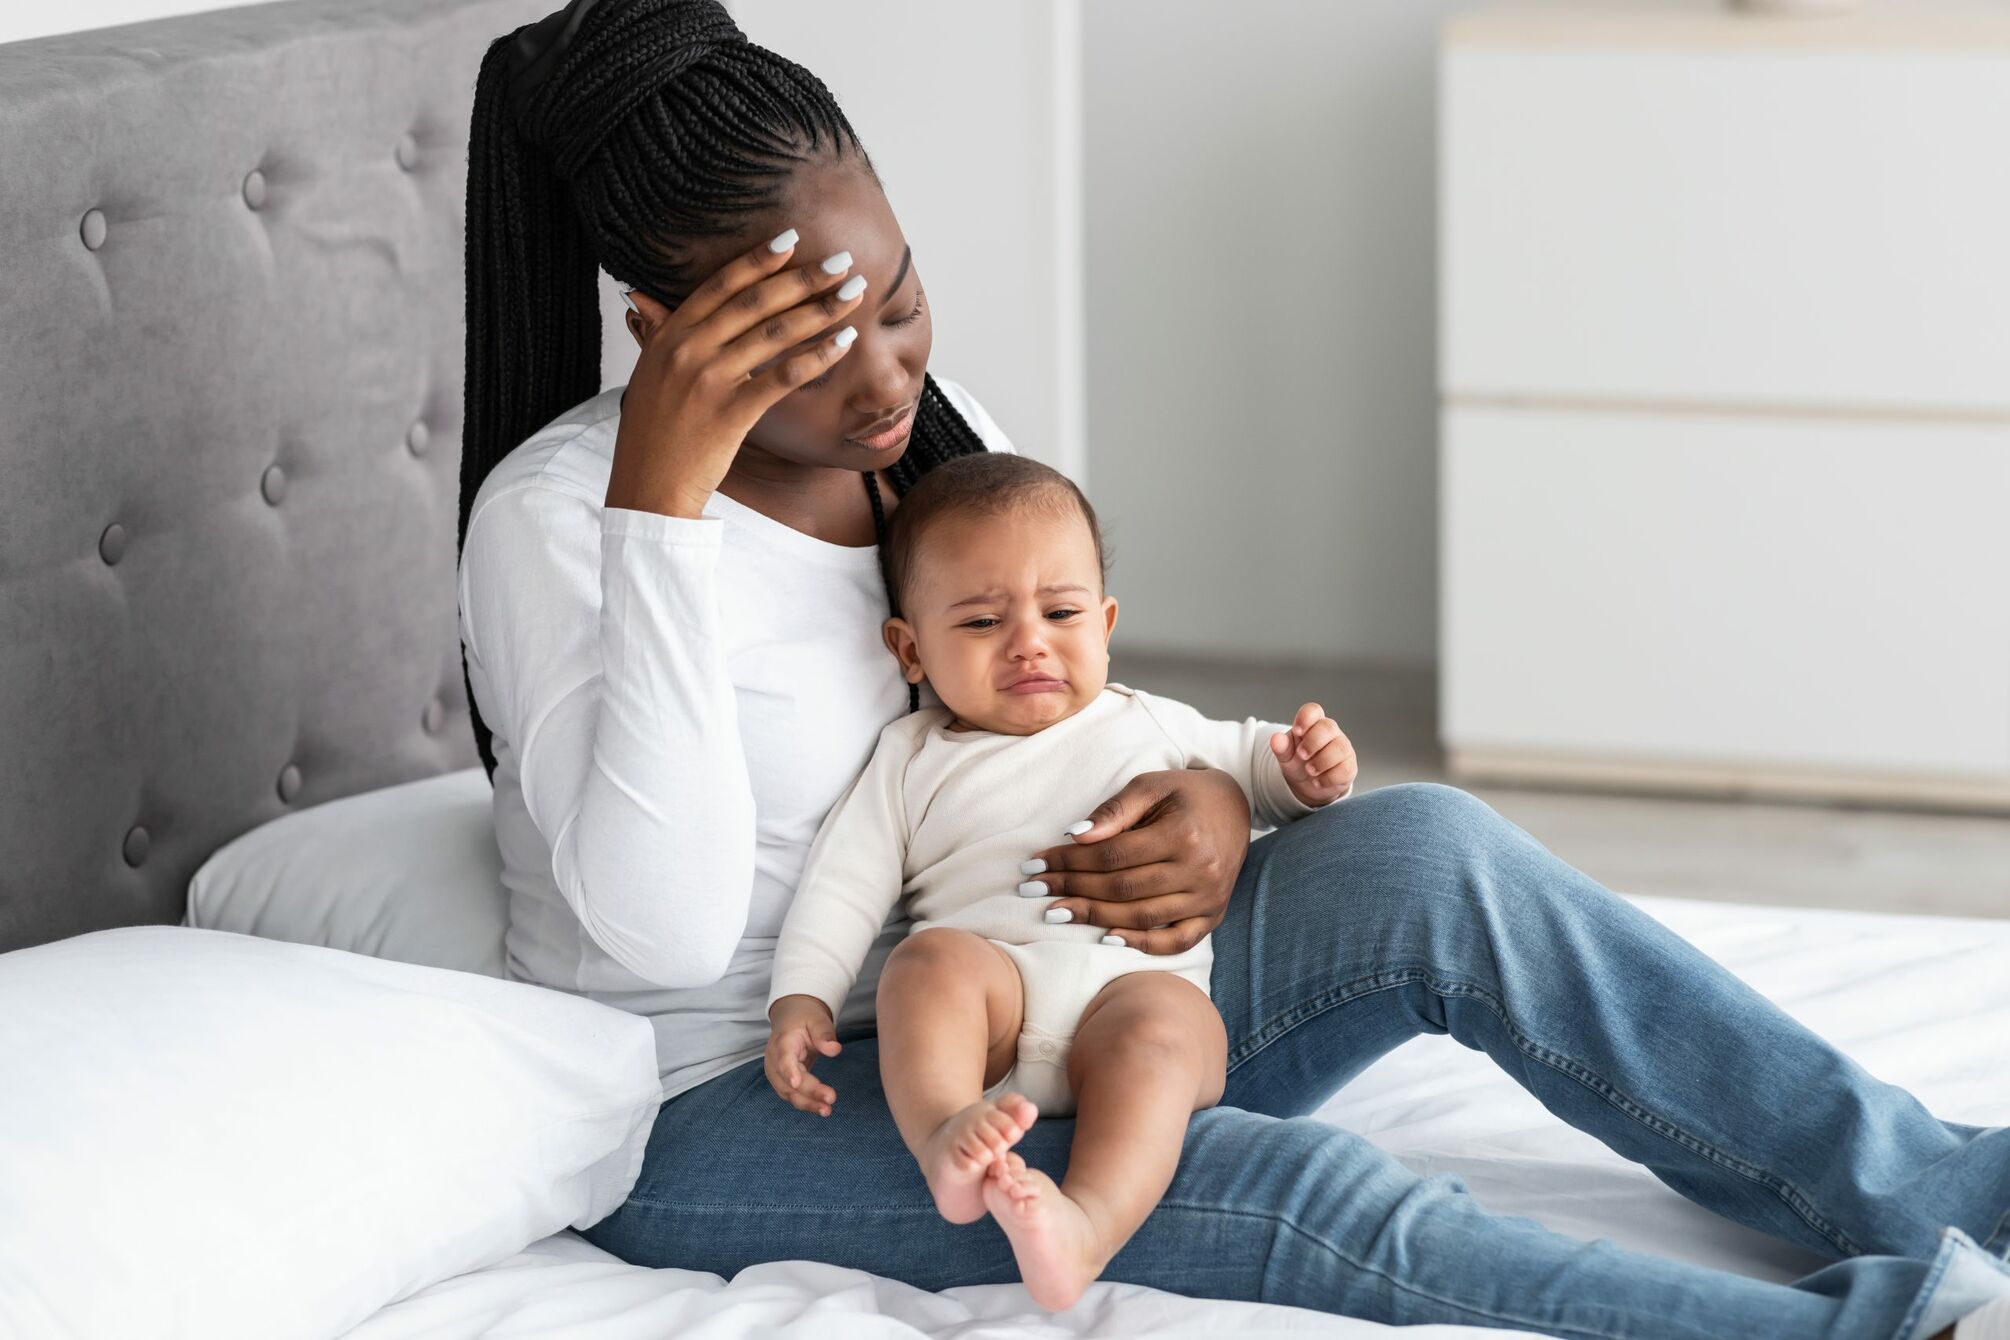 Postpartum depression: when the mind is coming apart